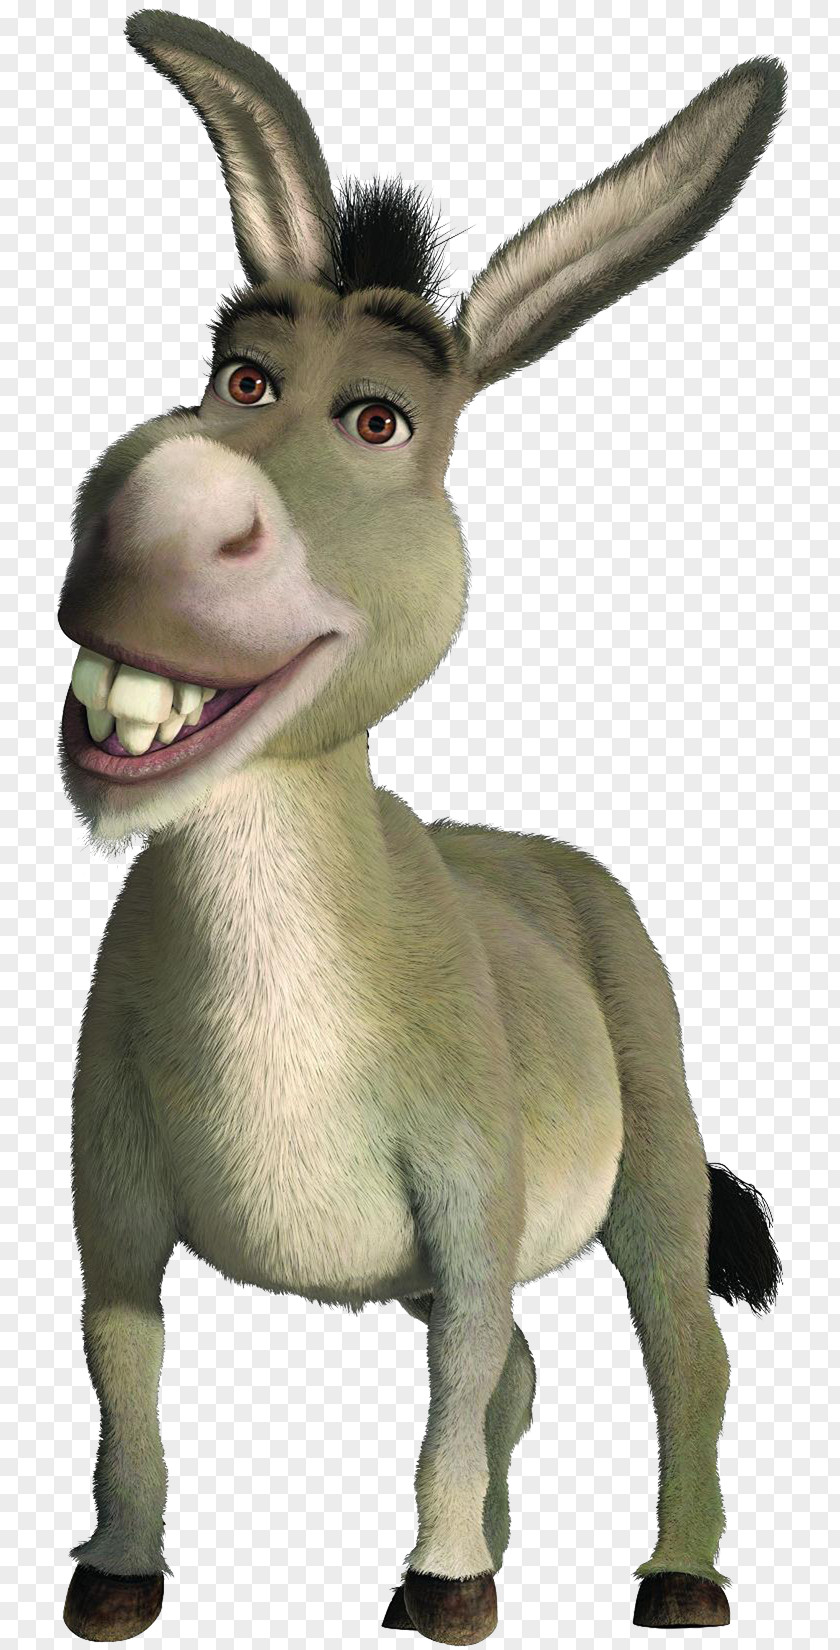 Donkey Shrek Princess Fiona Puss In Boots Dragon PNG